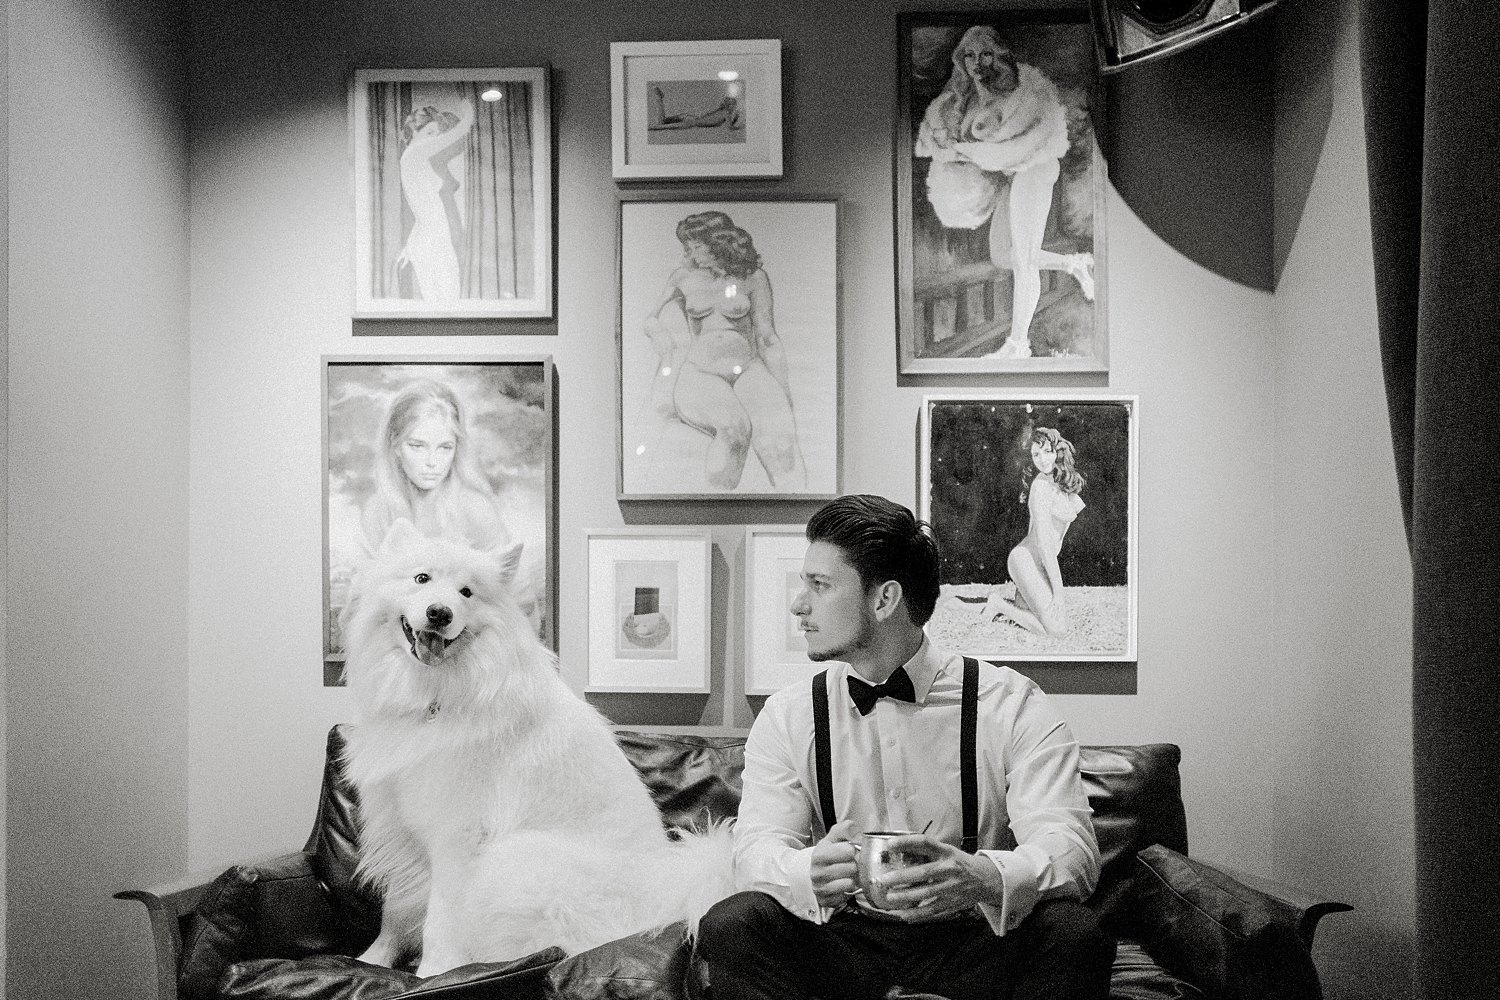 Man sitting with white fluffy dog in front of gallery wall black and white